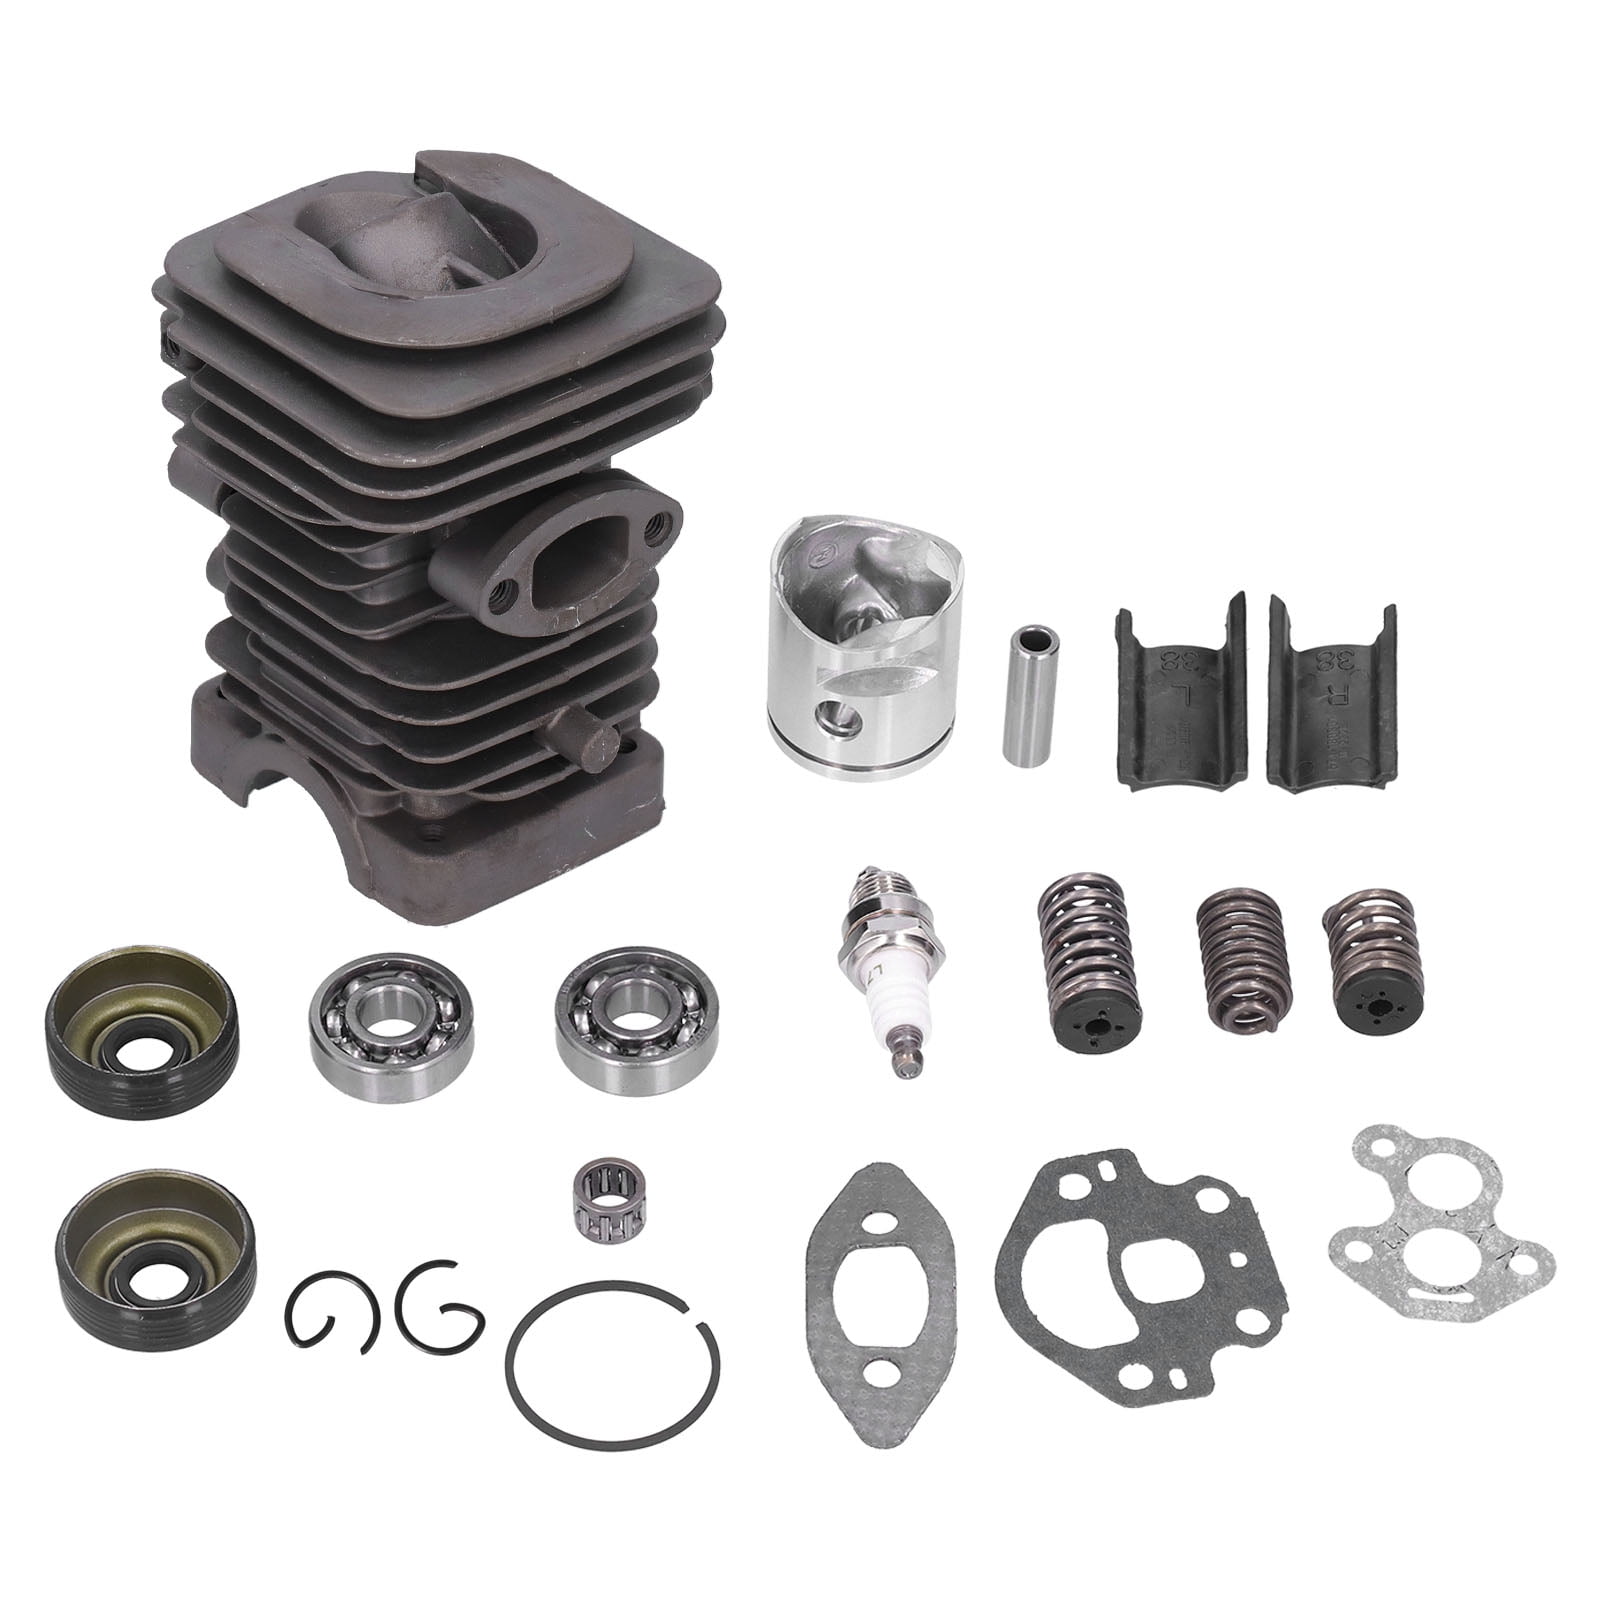 Cylinder Bearing Set, Aluminum Cylinder Piston Kit With Gasket For Chainsaw  For Garden